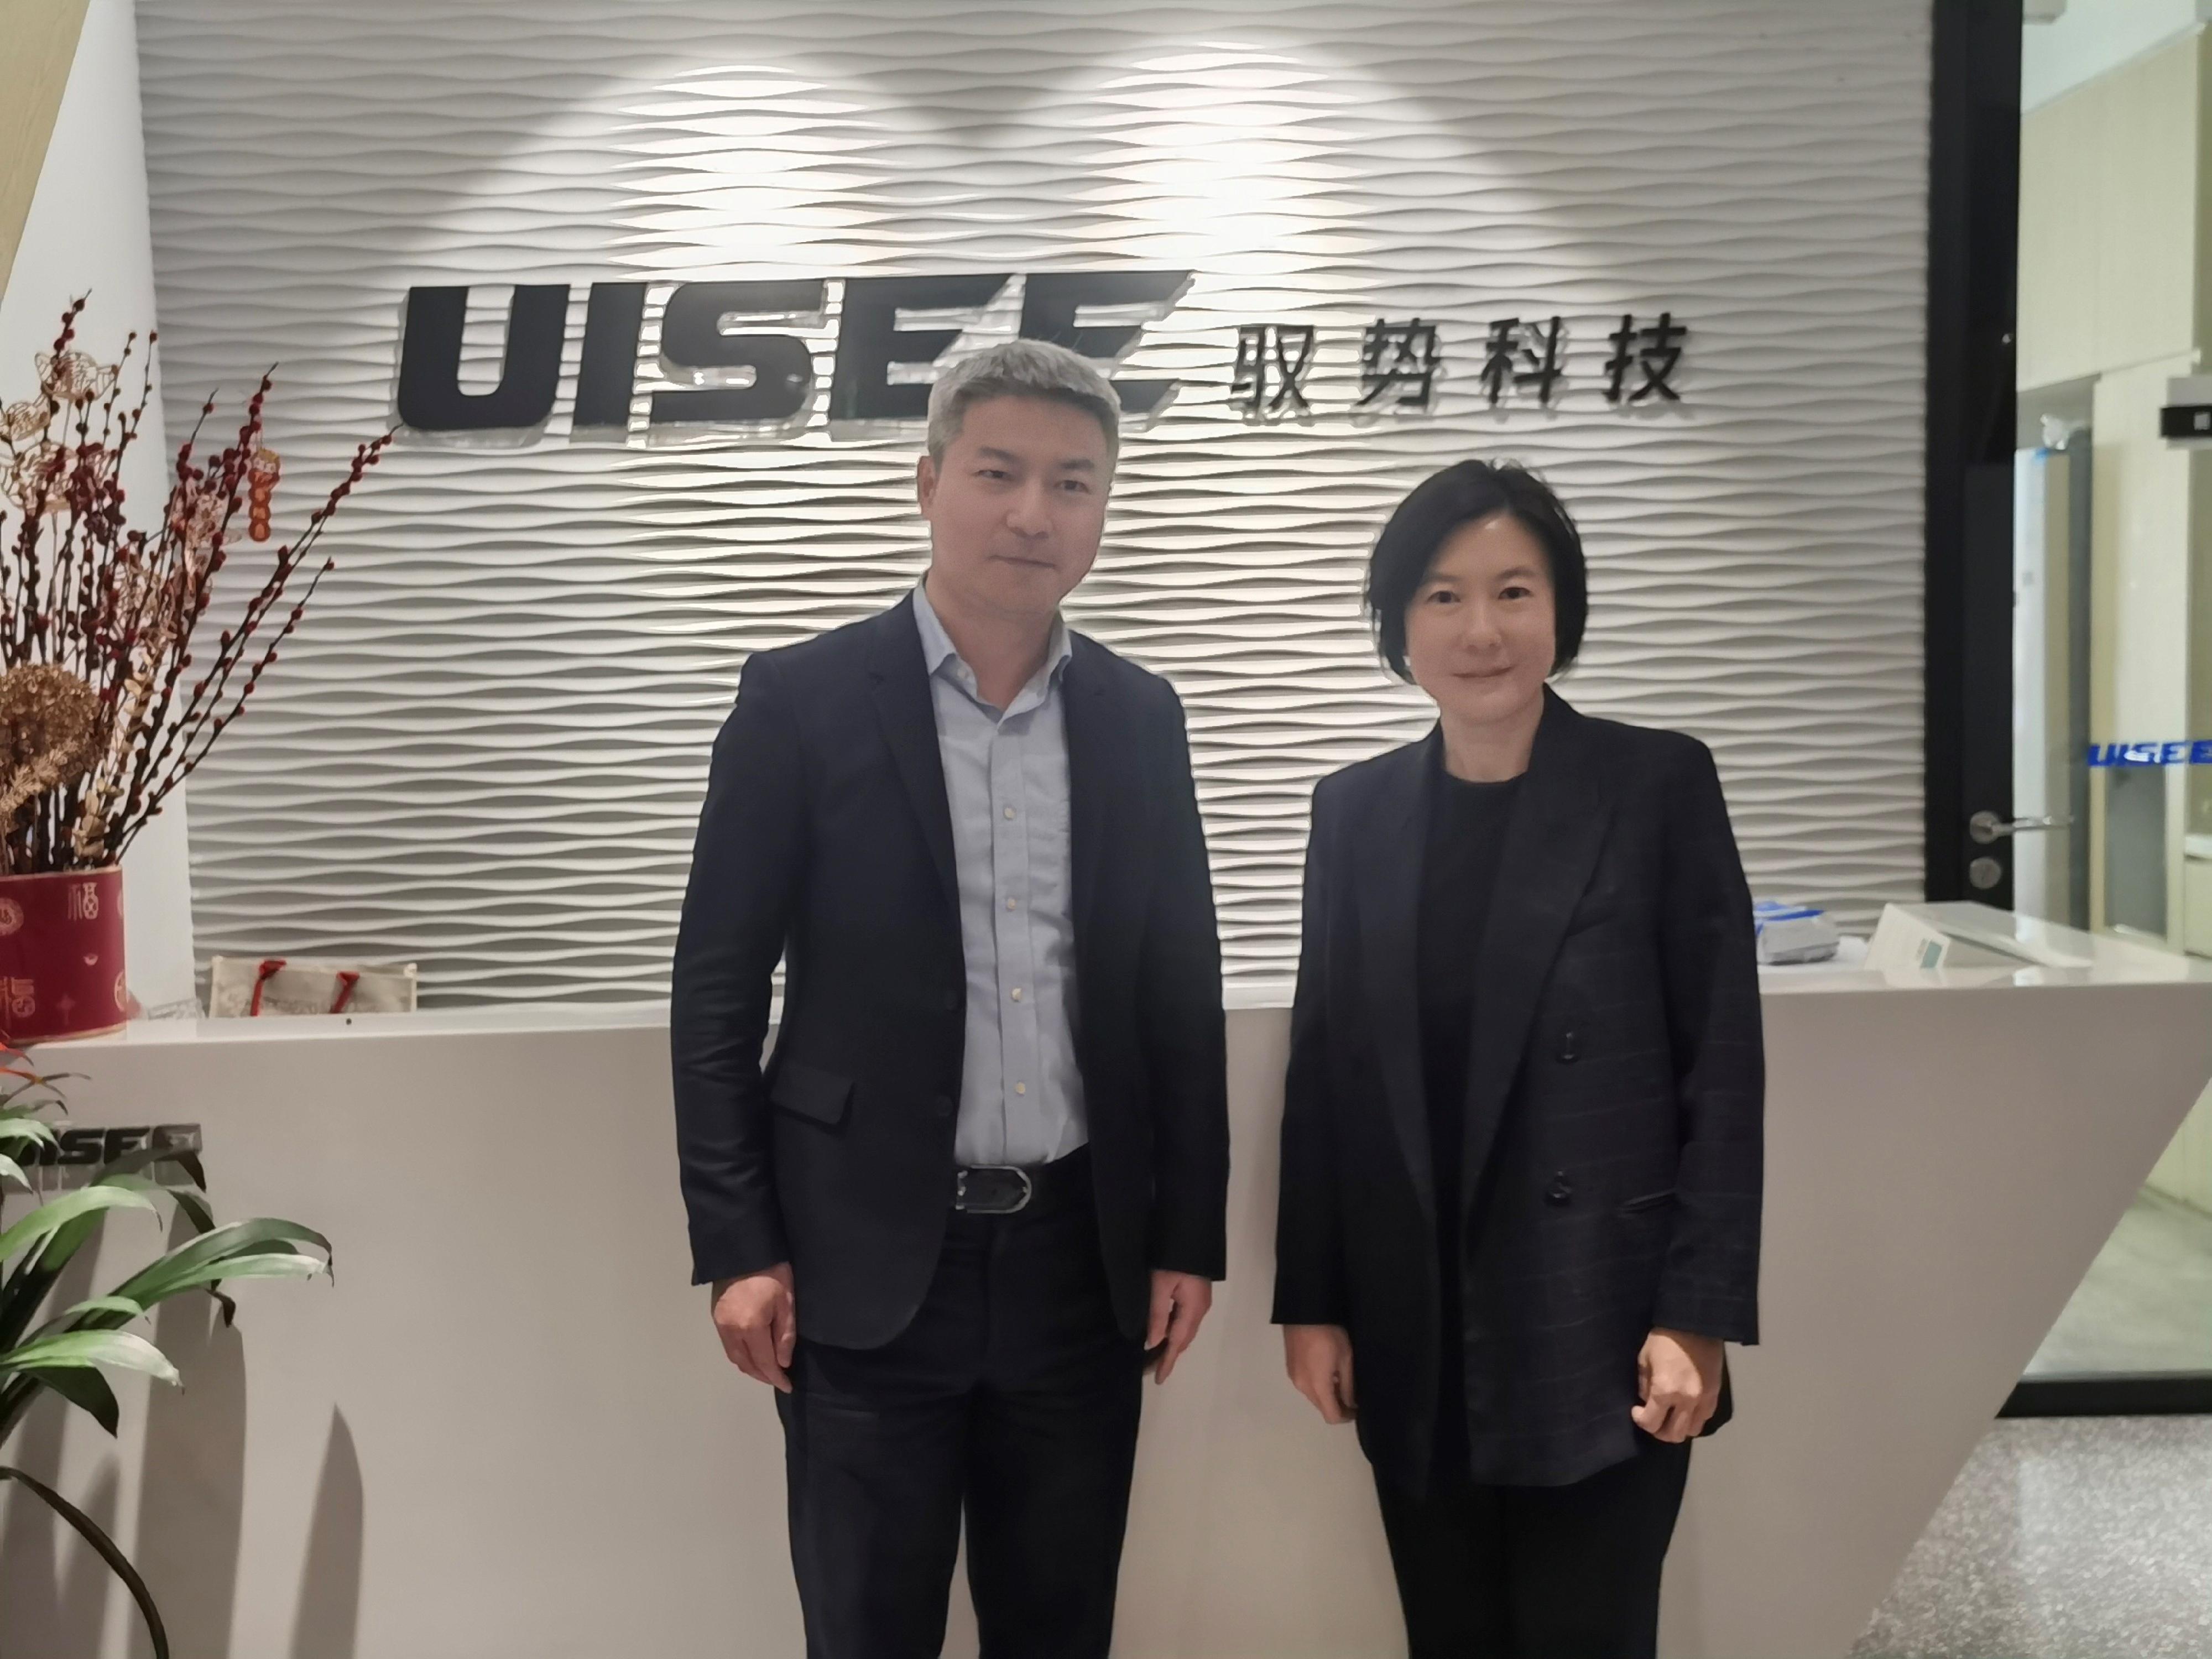 AI driverless technology company UISEE announced it will set up its international headquarters, a research and development centre and a corporate treasury centre in Hong Kong. Photo shows the Director-General of Investment Promotion at Invest Hong Kong, Ms Alpha Lau (right), with the Co-Founder, Chairman and CEO of UISEE, Mr Gansha Wu (left), during her recent visit to Beijing. 